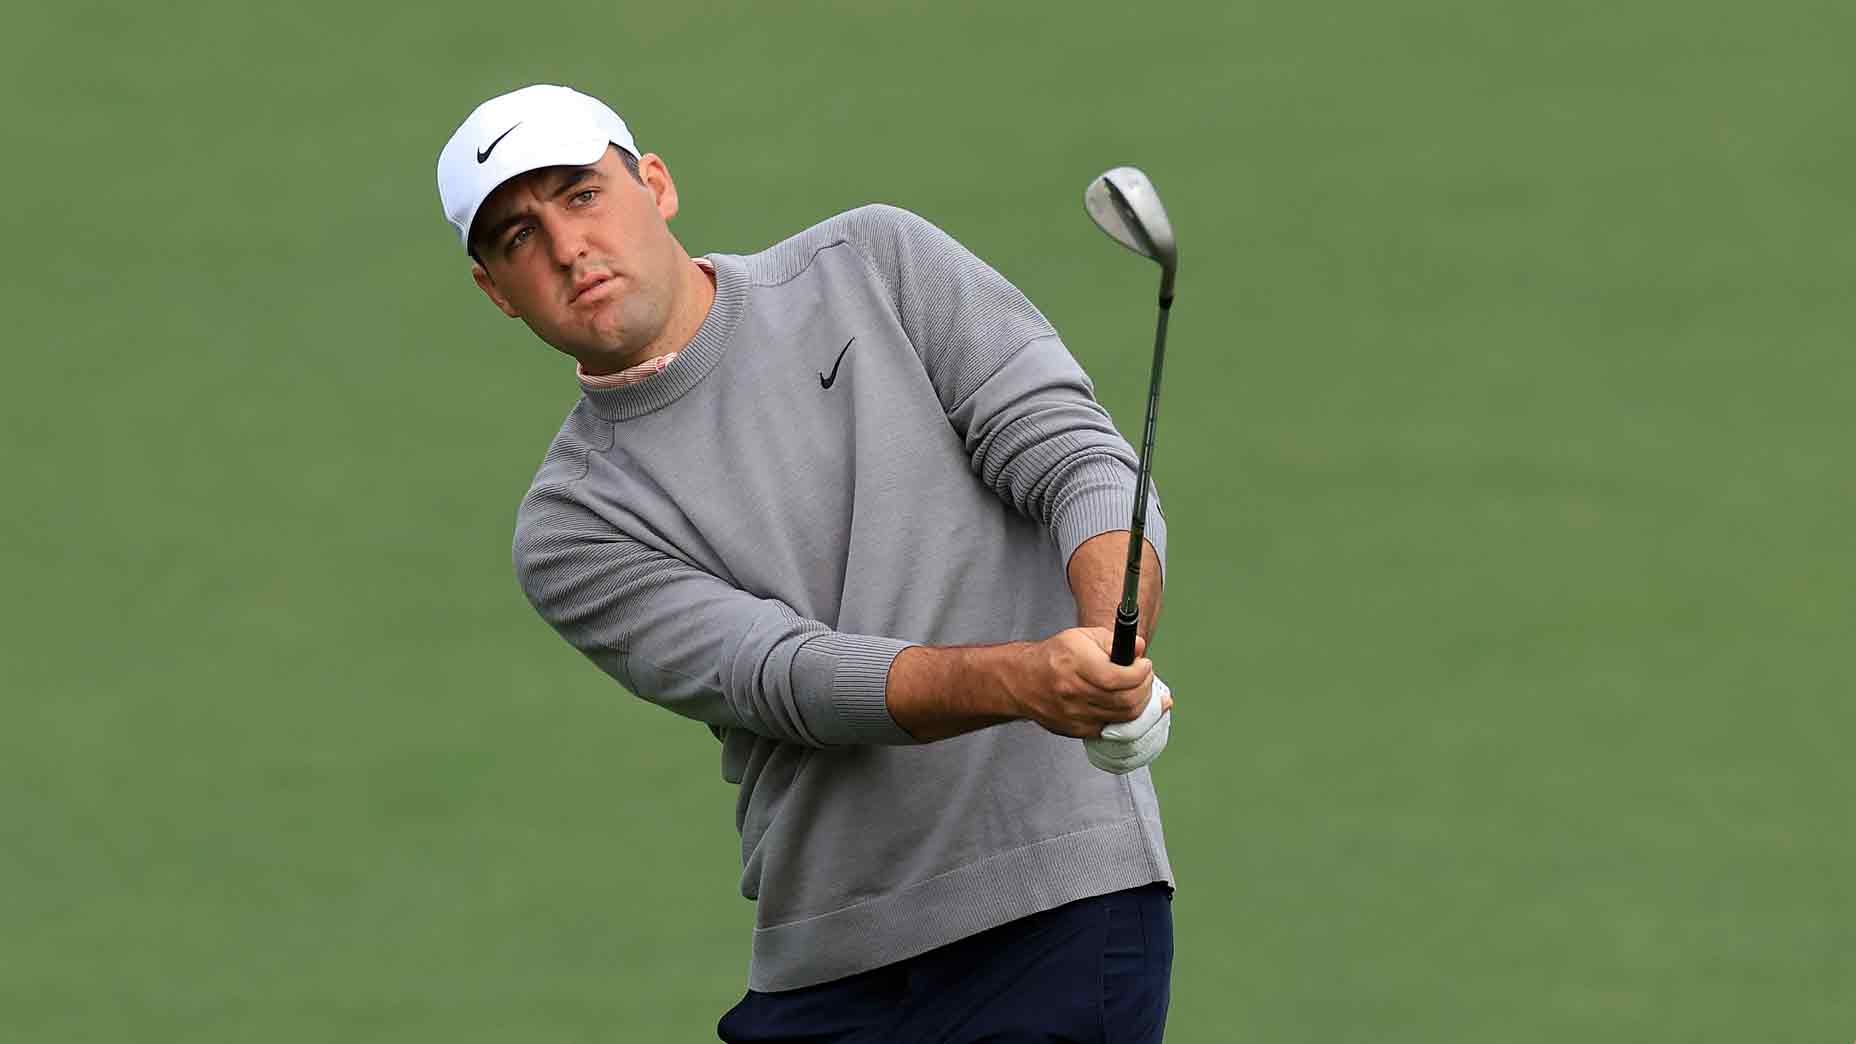 Fore Please! Your Friday Masters Betting Preview Is Here